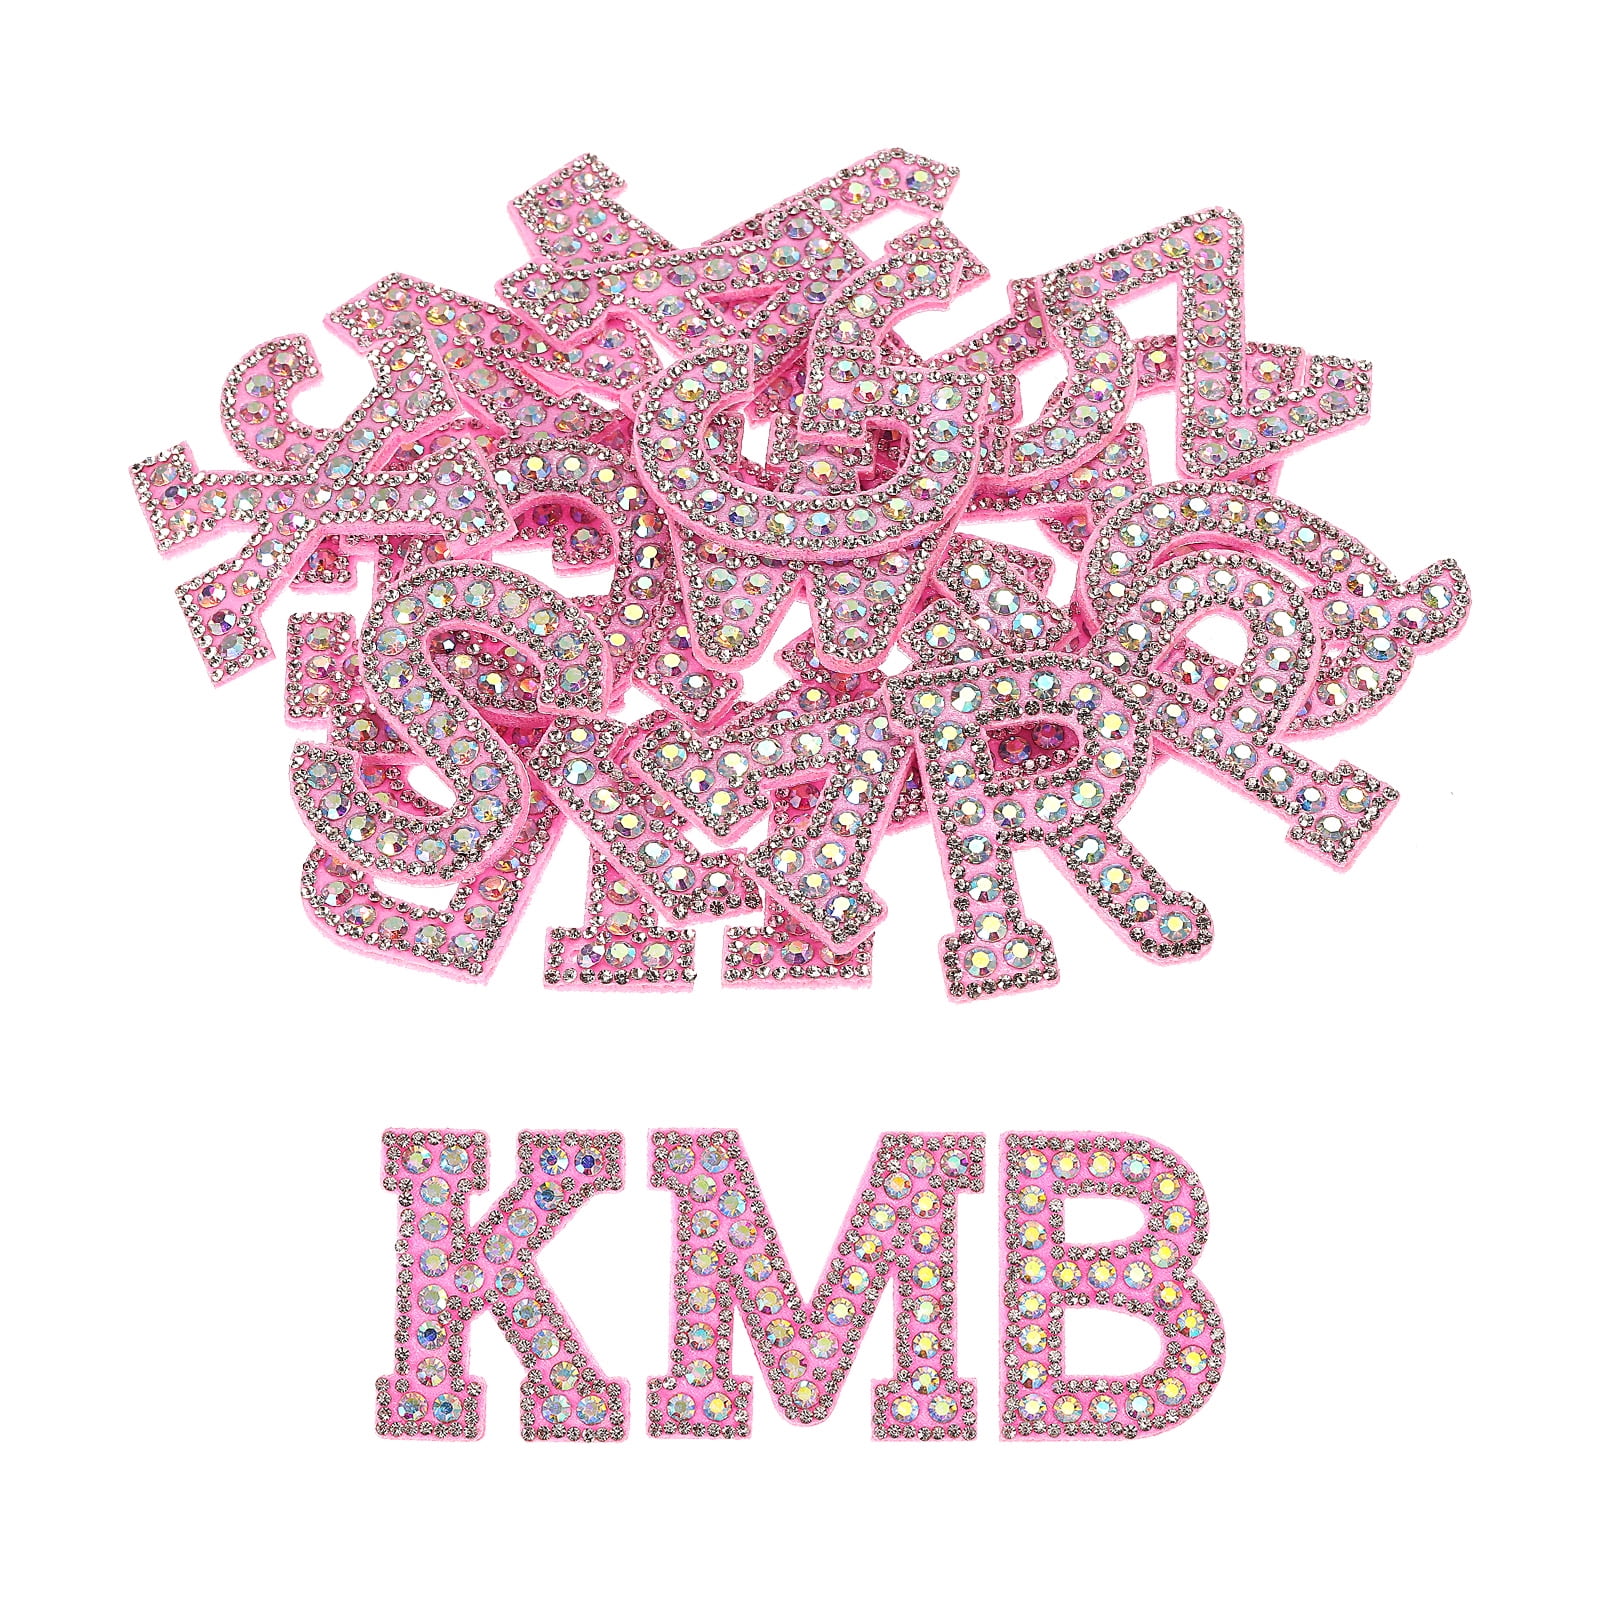 52 Pcs Iron on Letters Pearls Rhinestone English Patches Alphabet AZ  Glitter Pearl Sew On Patches Imitation Bling Decoration Patches Appliques  Fabric